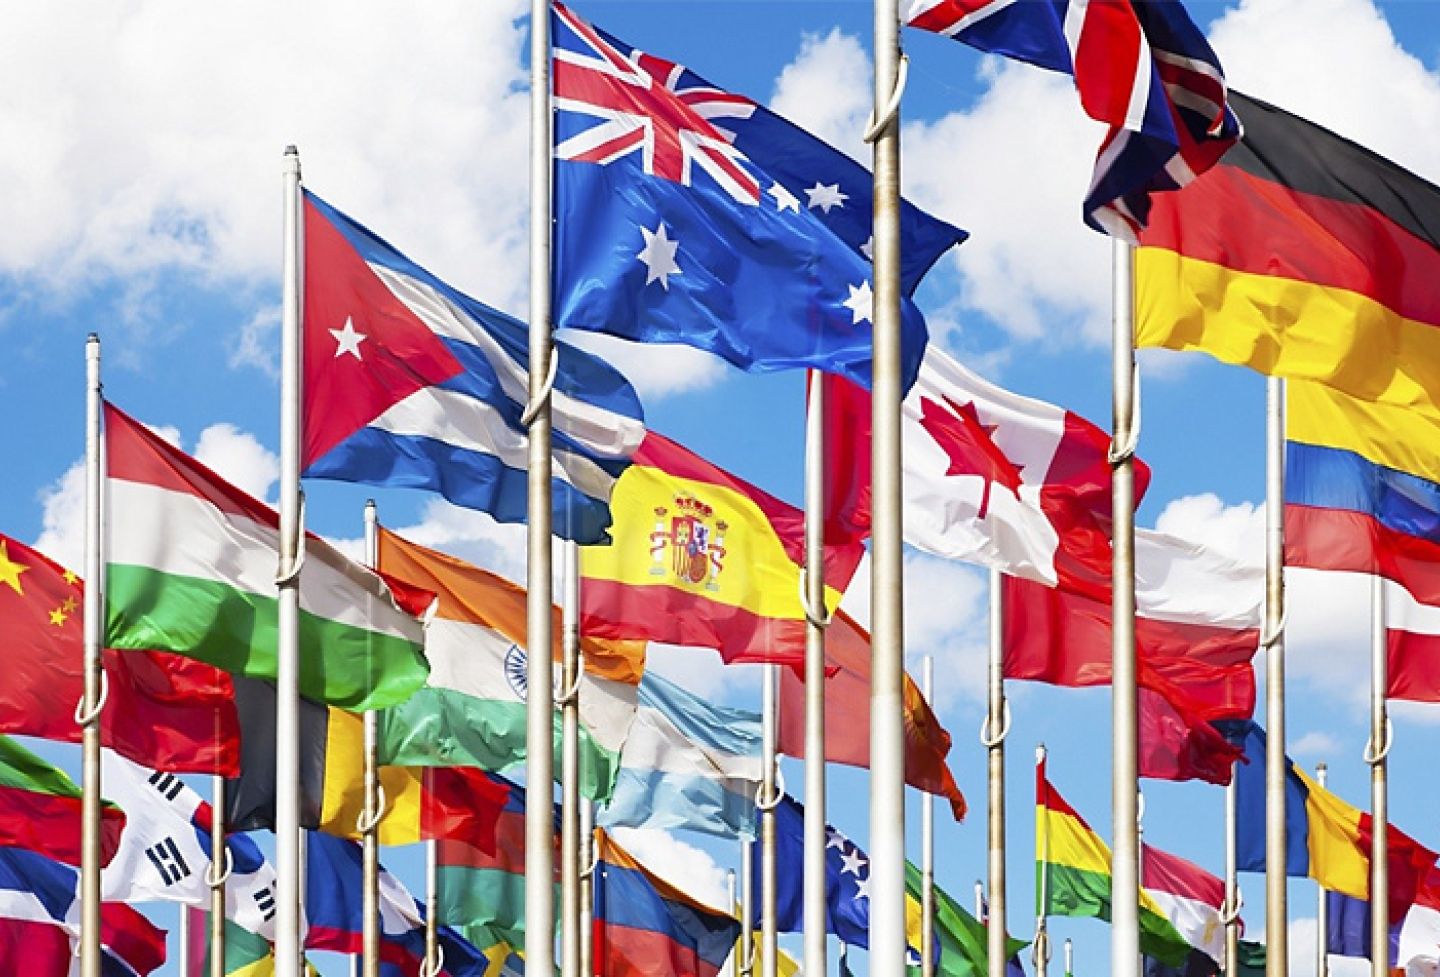 Nations' flags